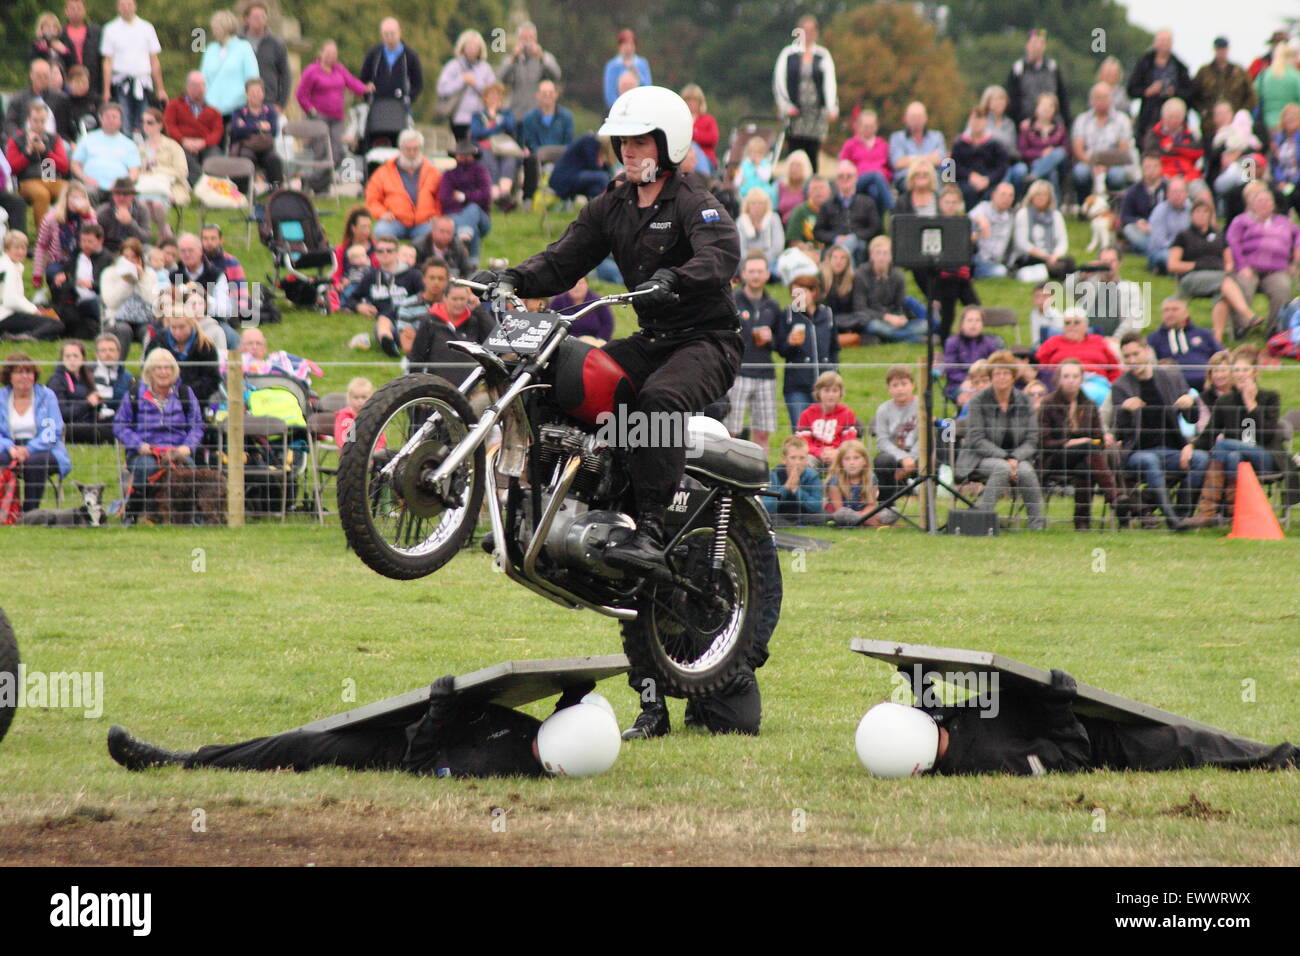 The Royal Signals White Helmets Motorcylcle display team perform at Chatsworth Country Fair, Peak District Derbyshire England UK Stock Photo